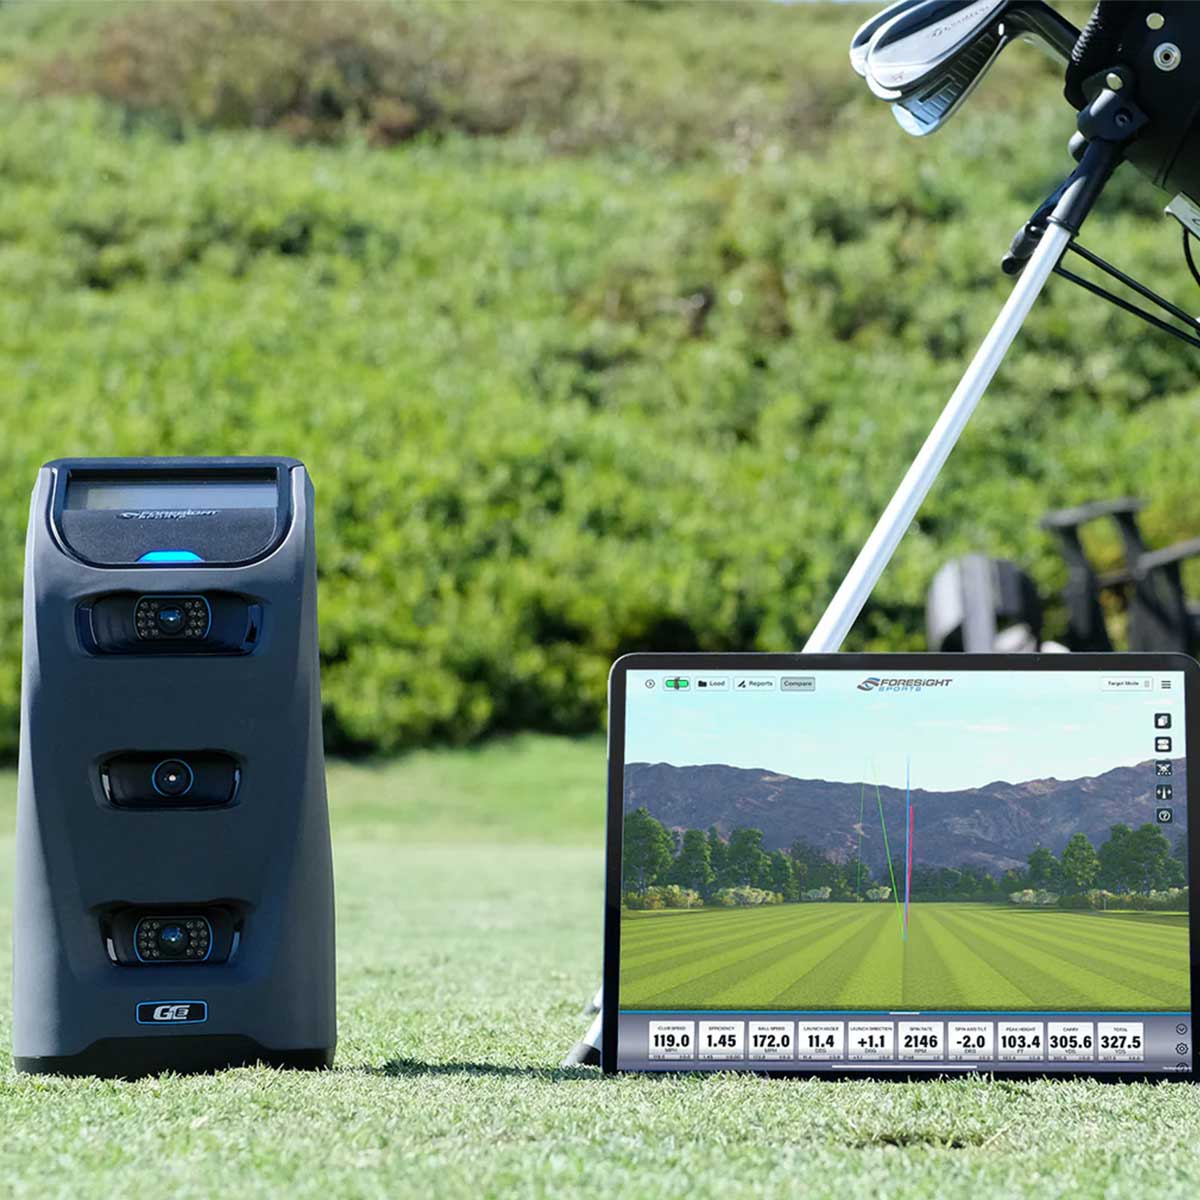 The Foresight Sports GC3 launch monitor on the golf course next to a laptop with FSX Play software on the screen with a golf stand bag partially shown in the background